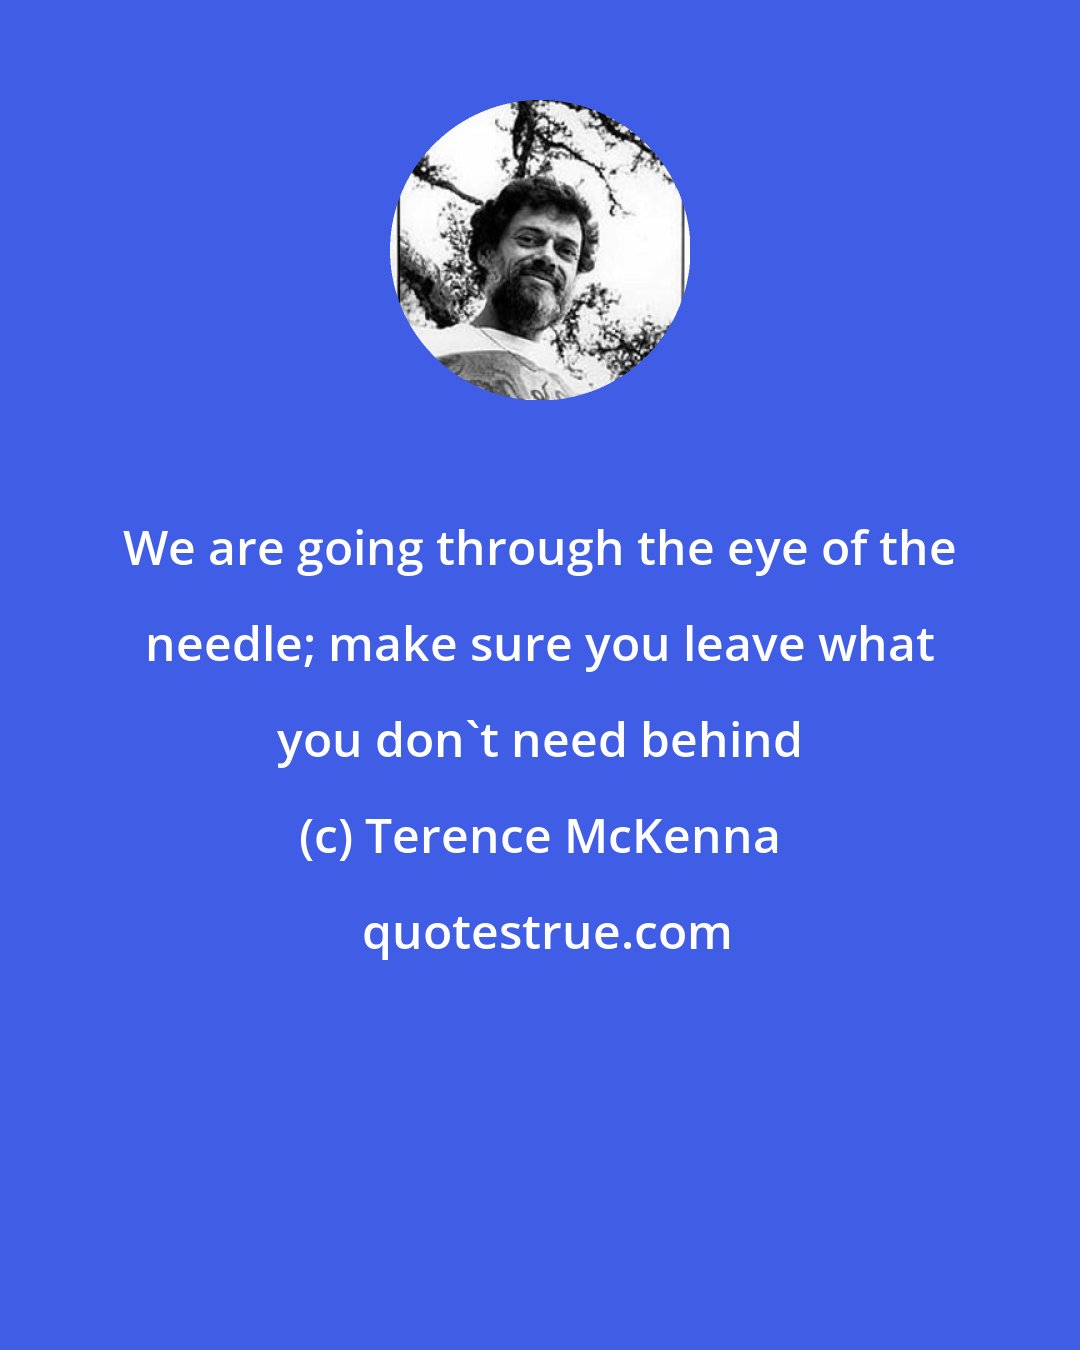 Terence McKenna: We are going through the eye of the needle; make sure you leave what you don't need behind